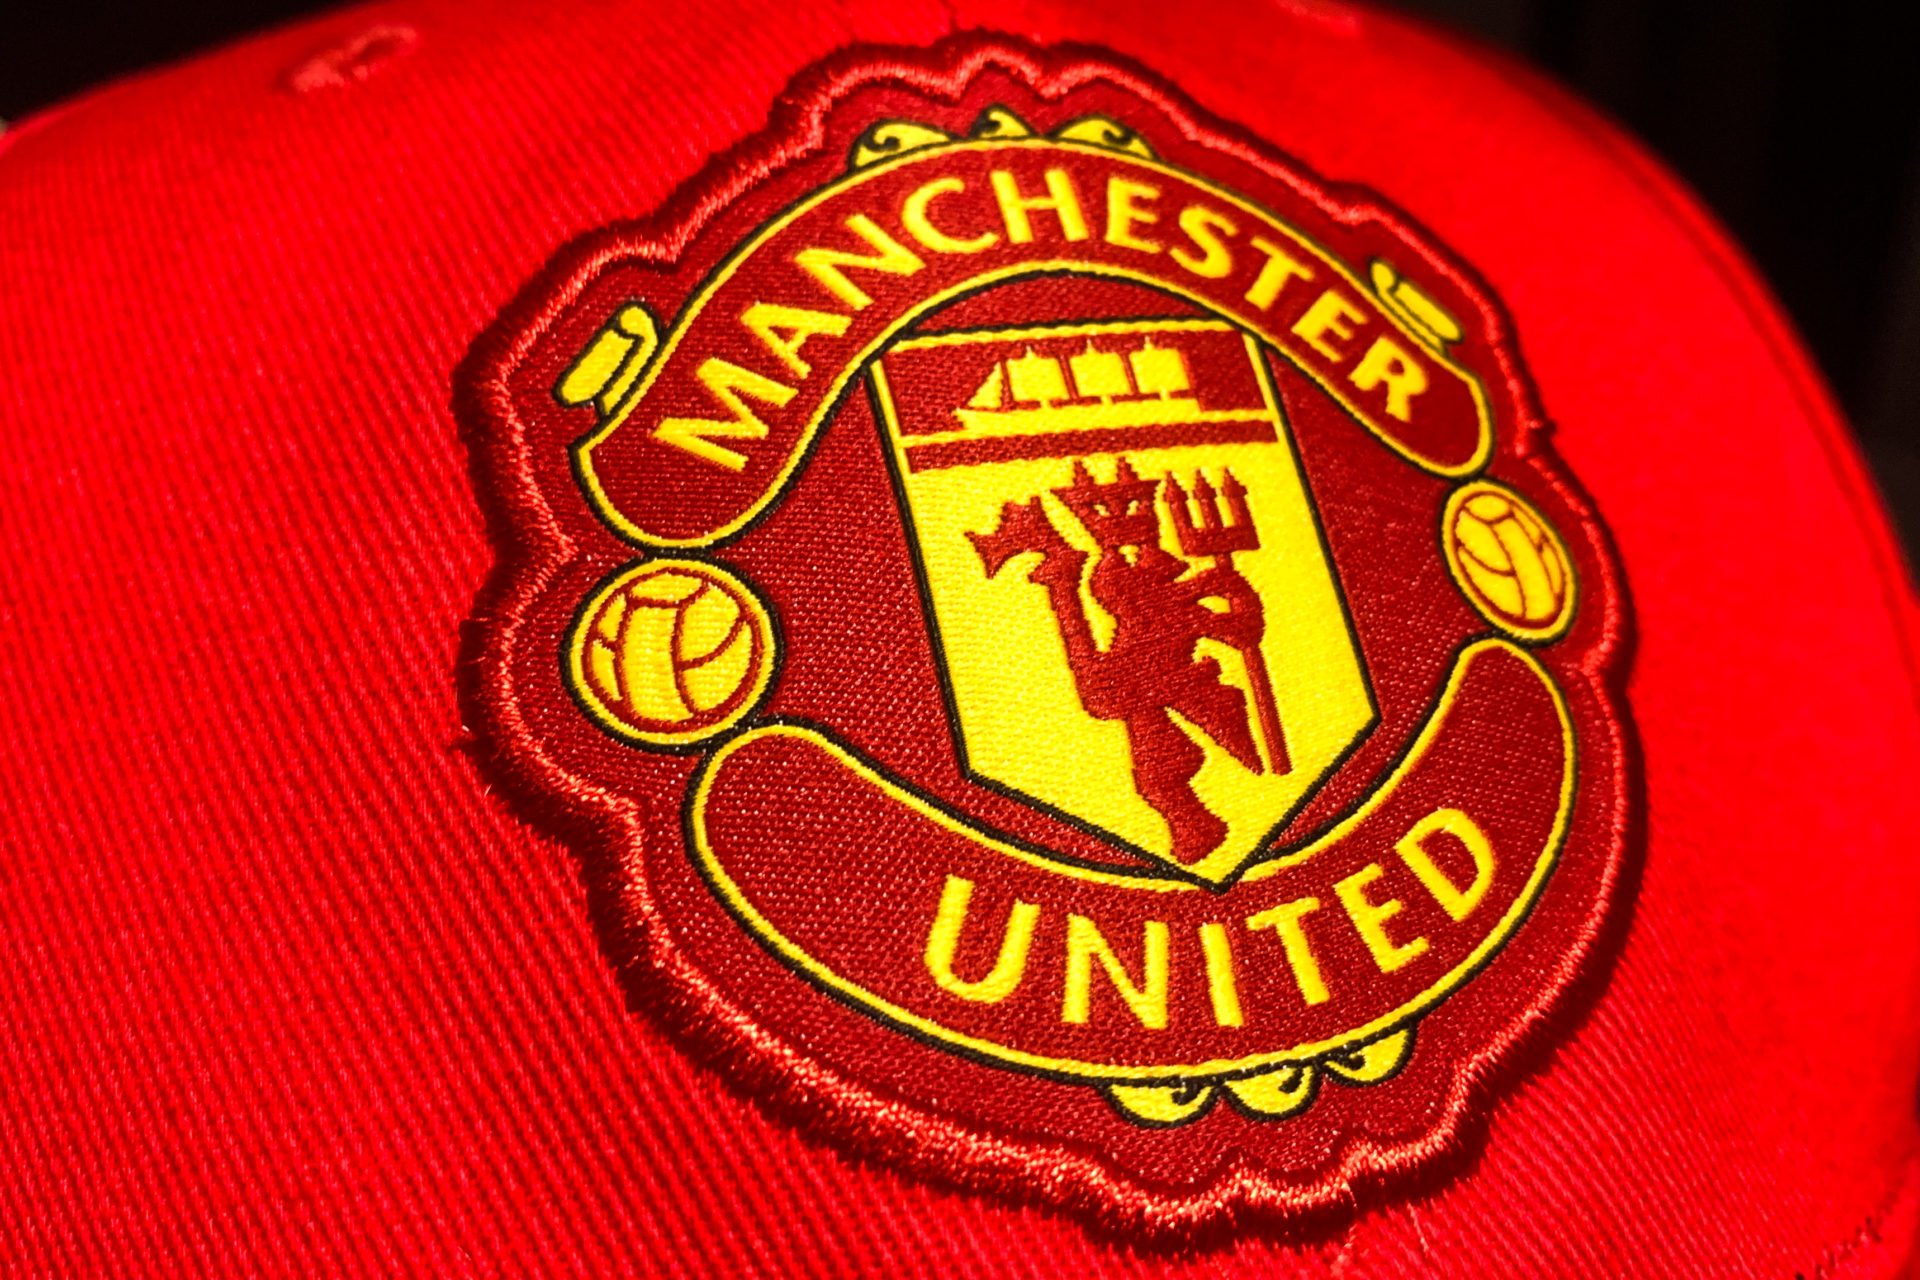 Manchester United home kit launch delayed - United In Focus